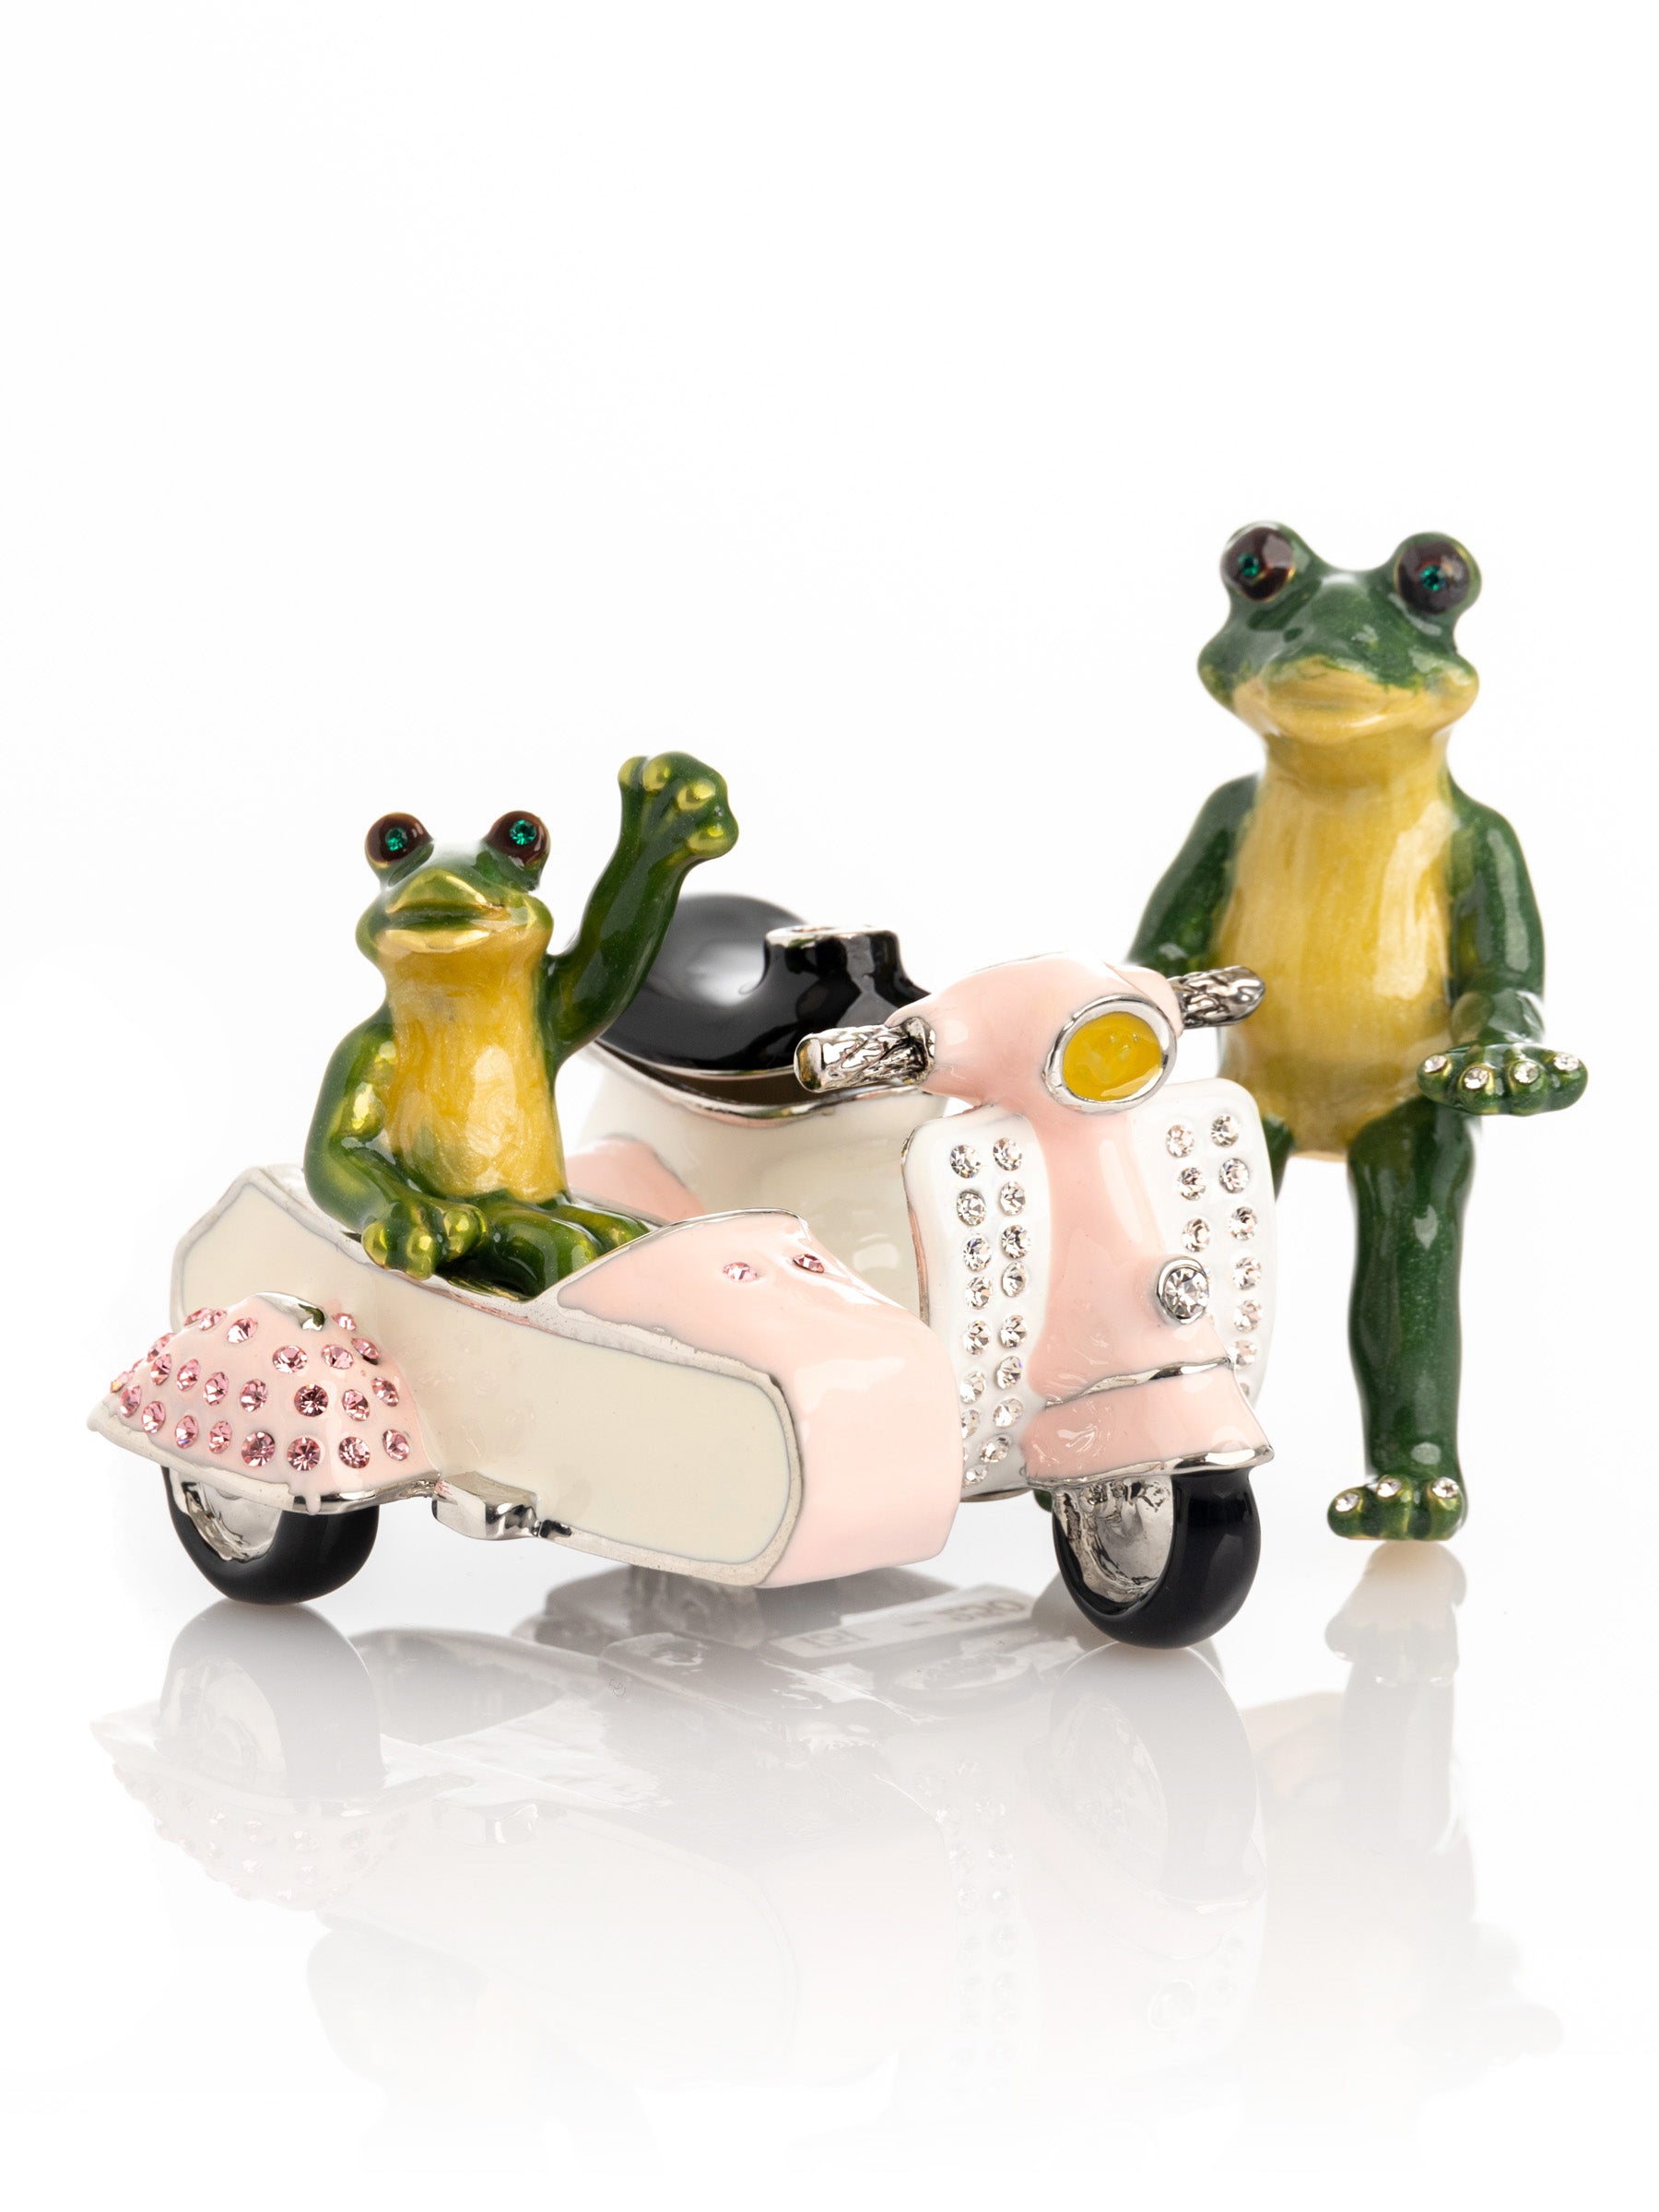 Frogs Riding Vespa with Sidecar